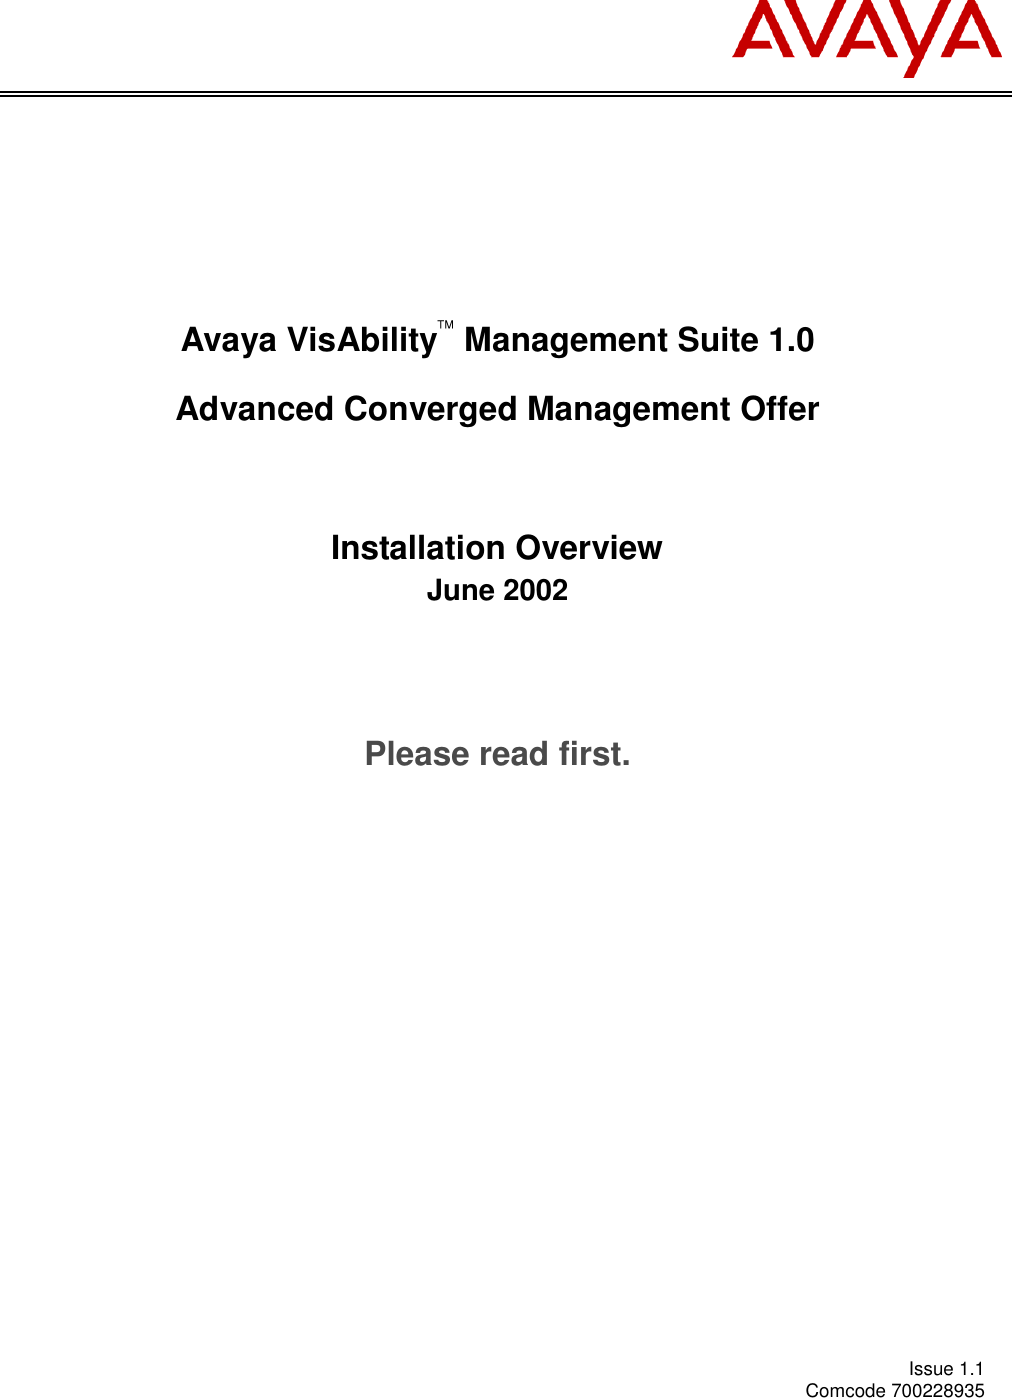 Page 1 of 11 - Avaya Avaya-Visability-Management-Suite-1-0-Advanced-Converged-Management-Offer-Overview-  Avaya-visability-management-suite-1-0-advanced-converged-management-offer-overview